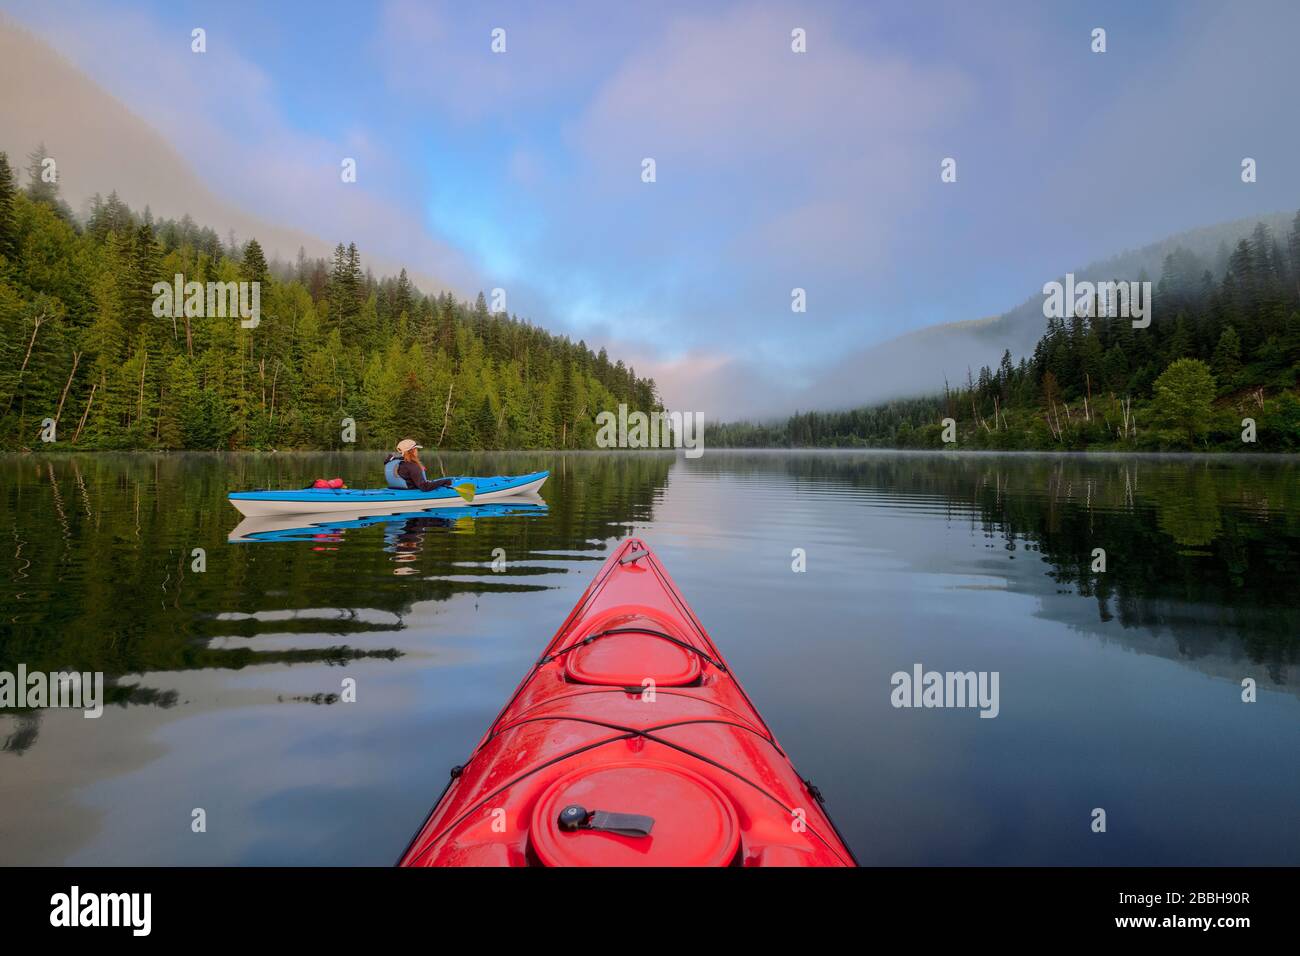 Kayakers with red and blue kayaks on Echo Lake at sunrise, Echo Lake provincial park near Lumby, British Columbia, Canada Stock Photo